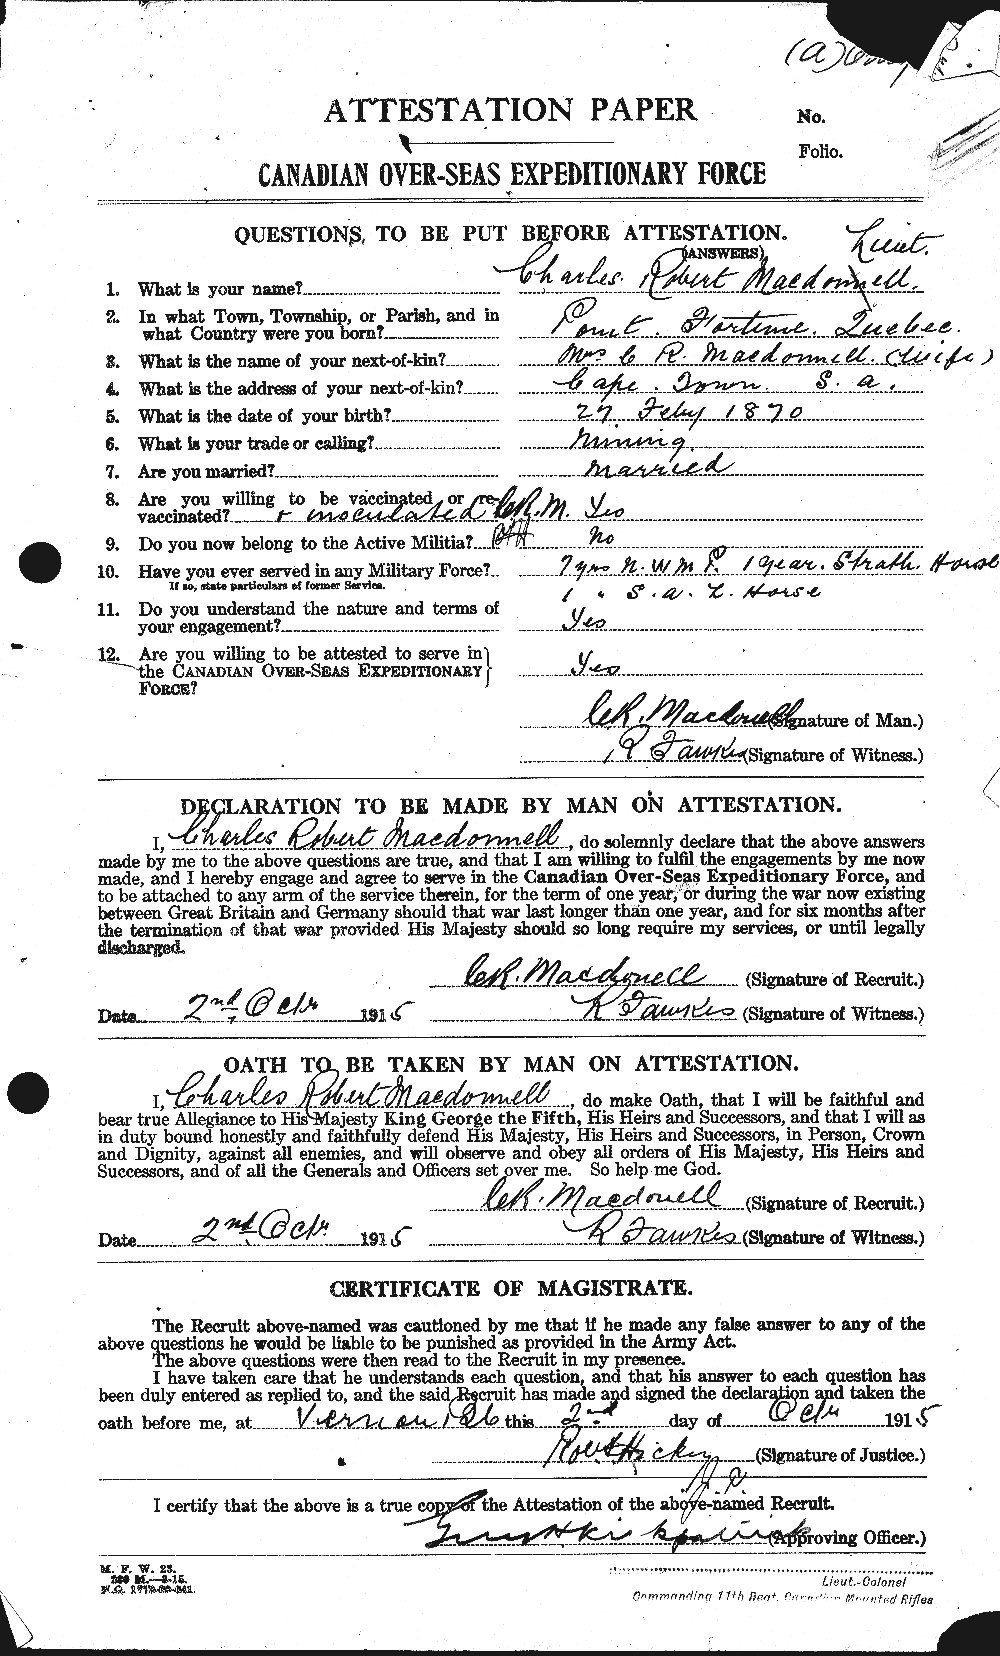 Personnel Records of the First World War - CEF 521409a